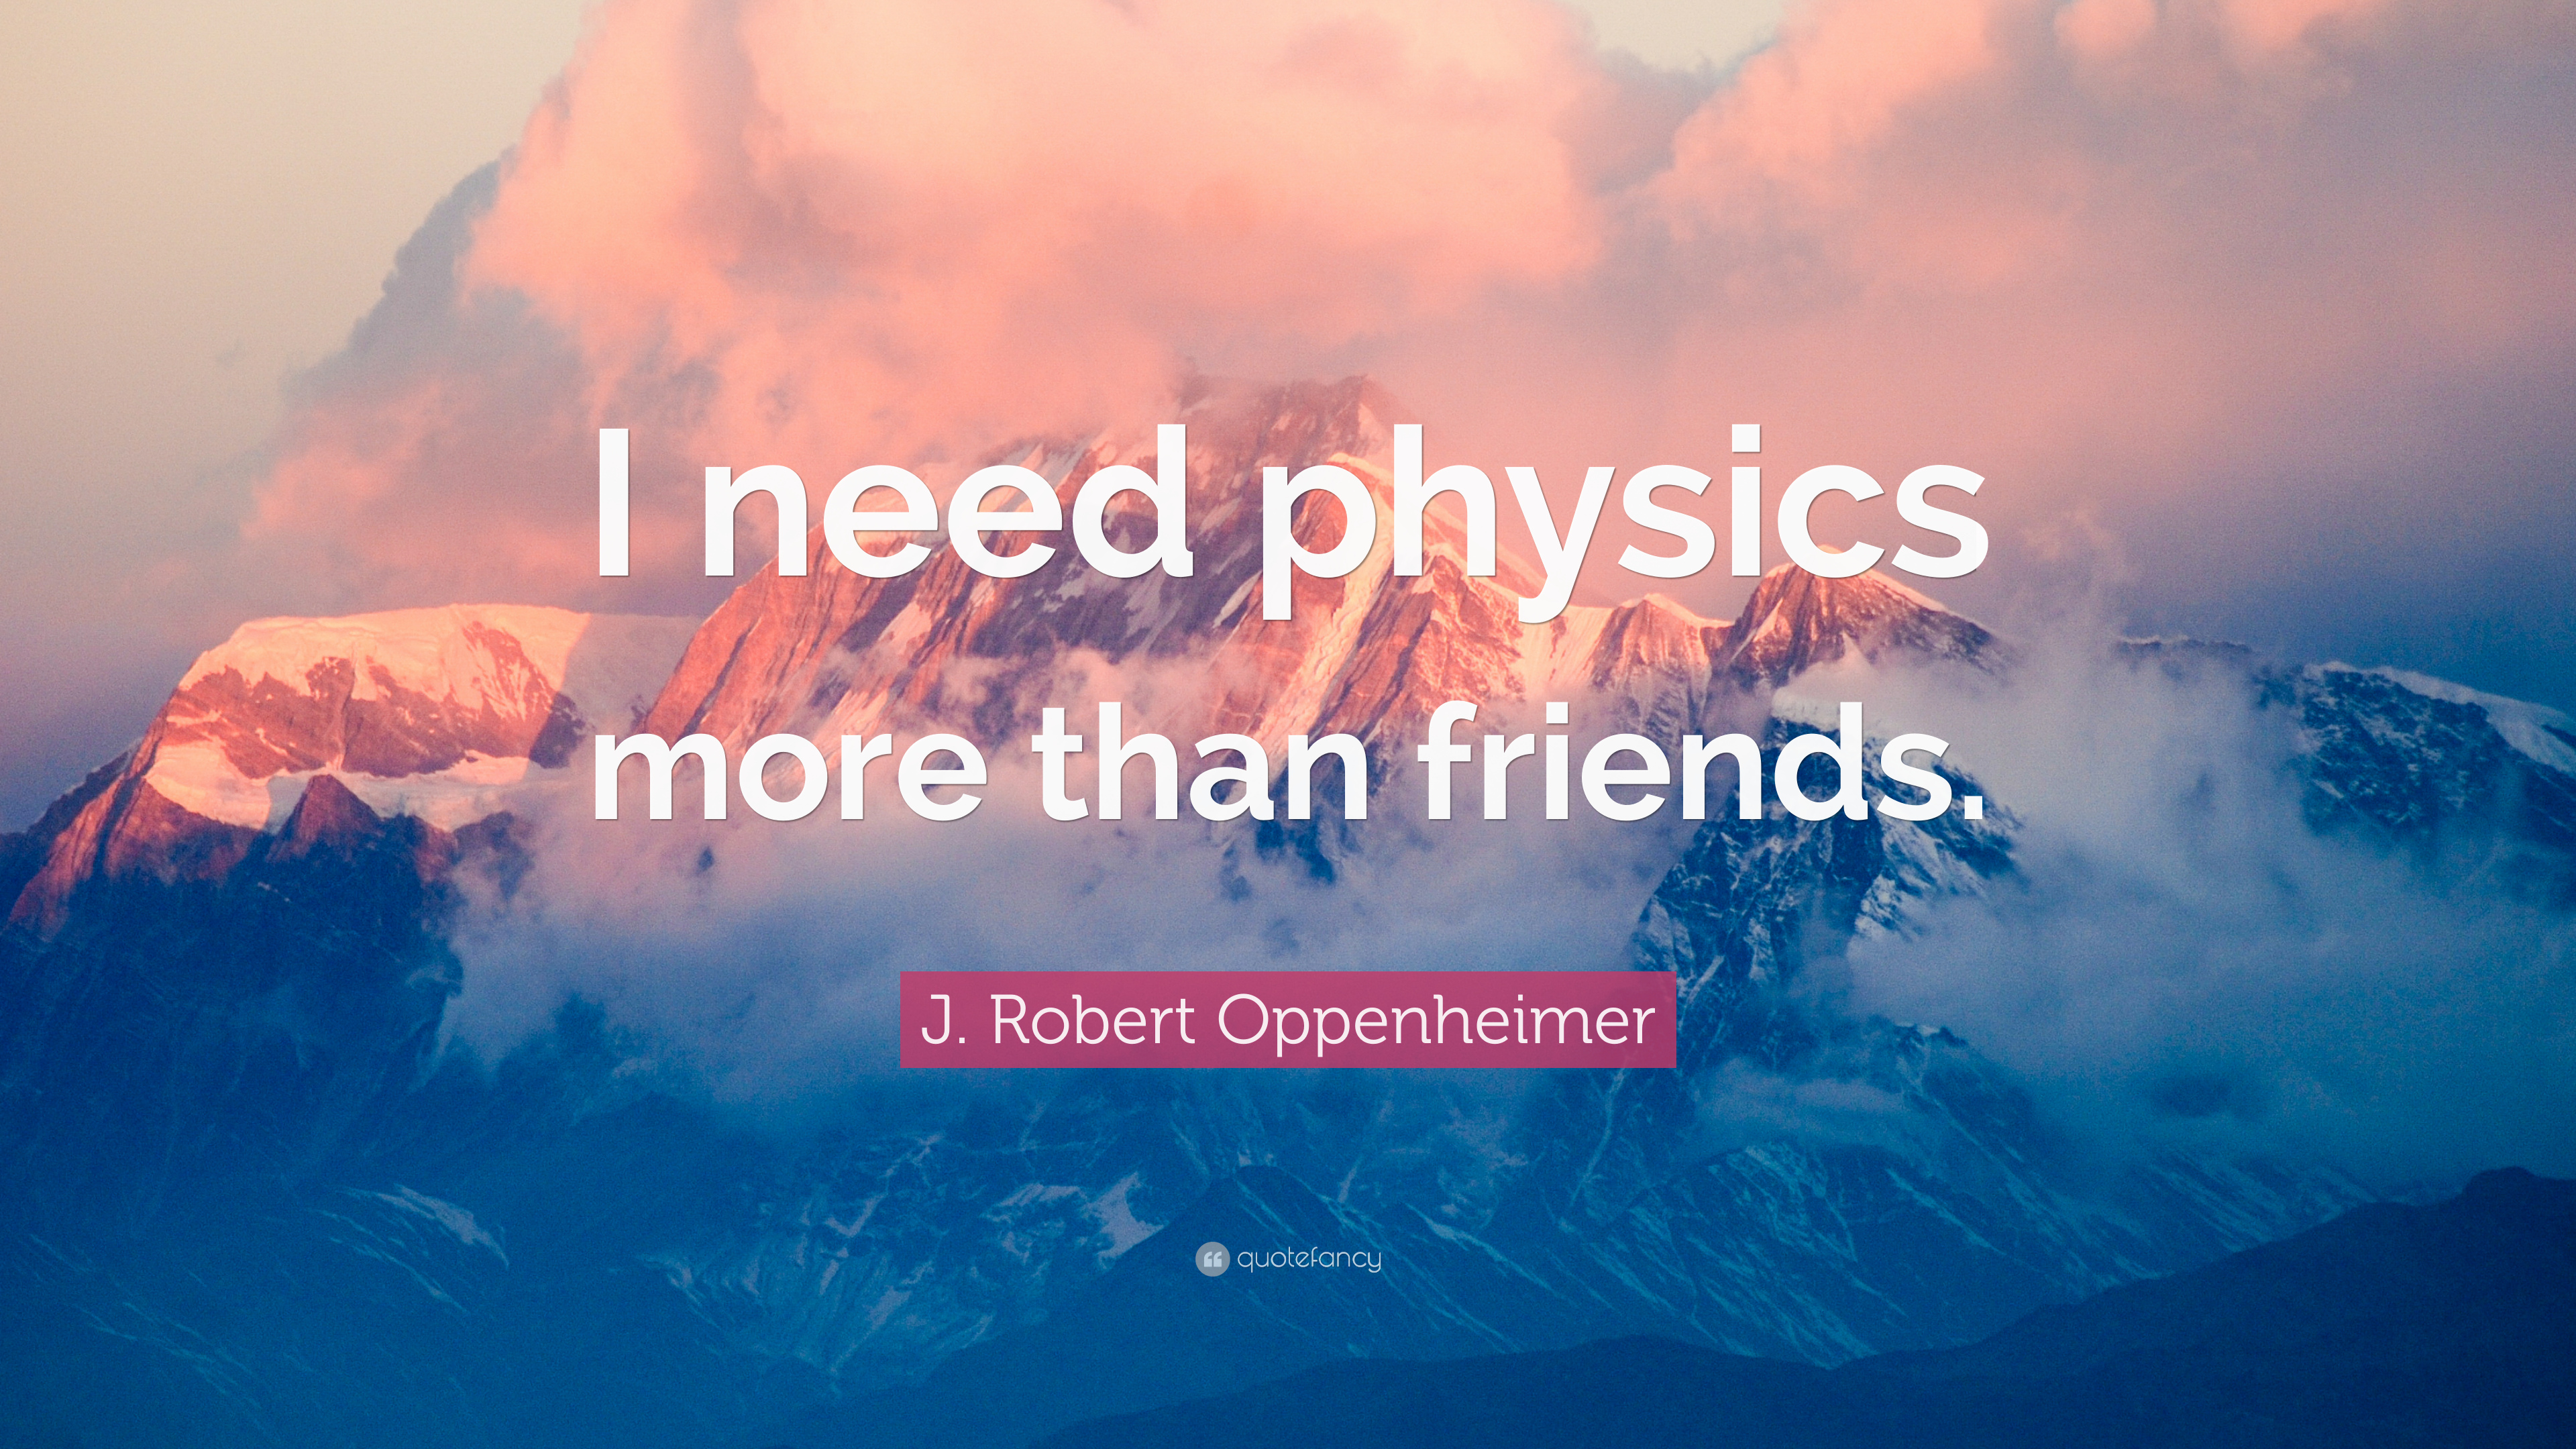 J. Robert Oppenheimer Quote: “I need physics more than friends.”